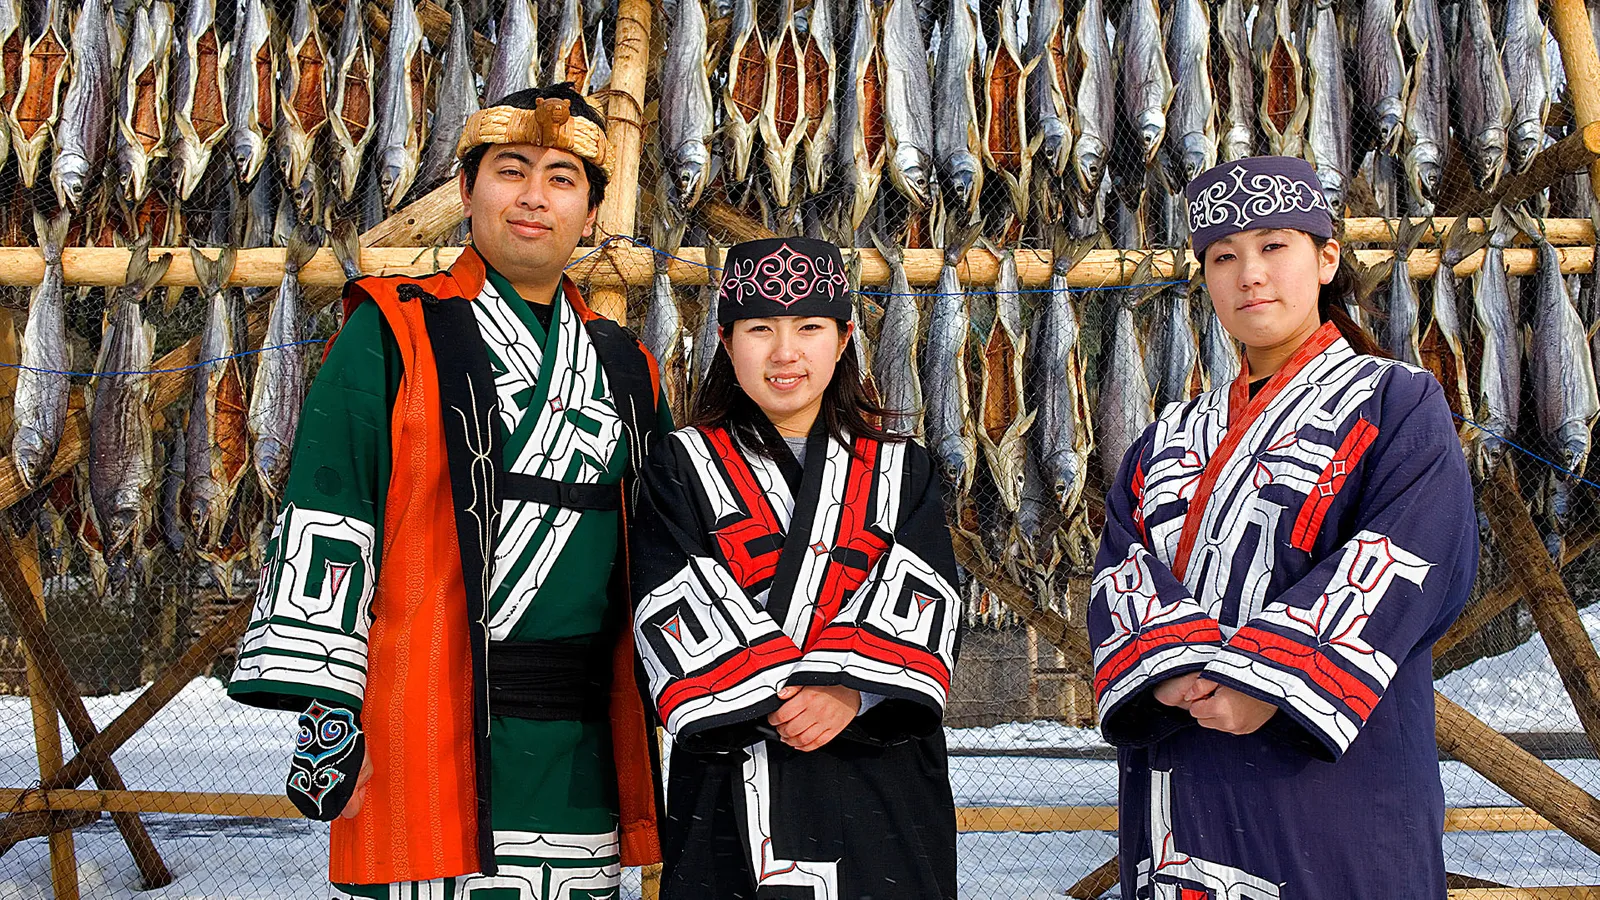 Despite enduring 150 years of oppression, the Indigenous Ainu people still retain a strong sense of appreciation for the world  